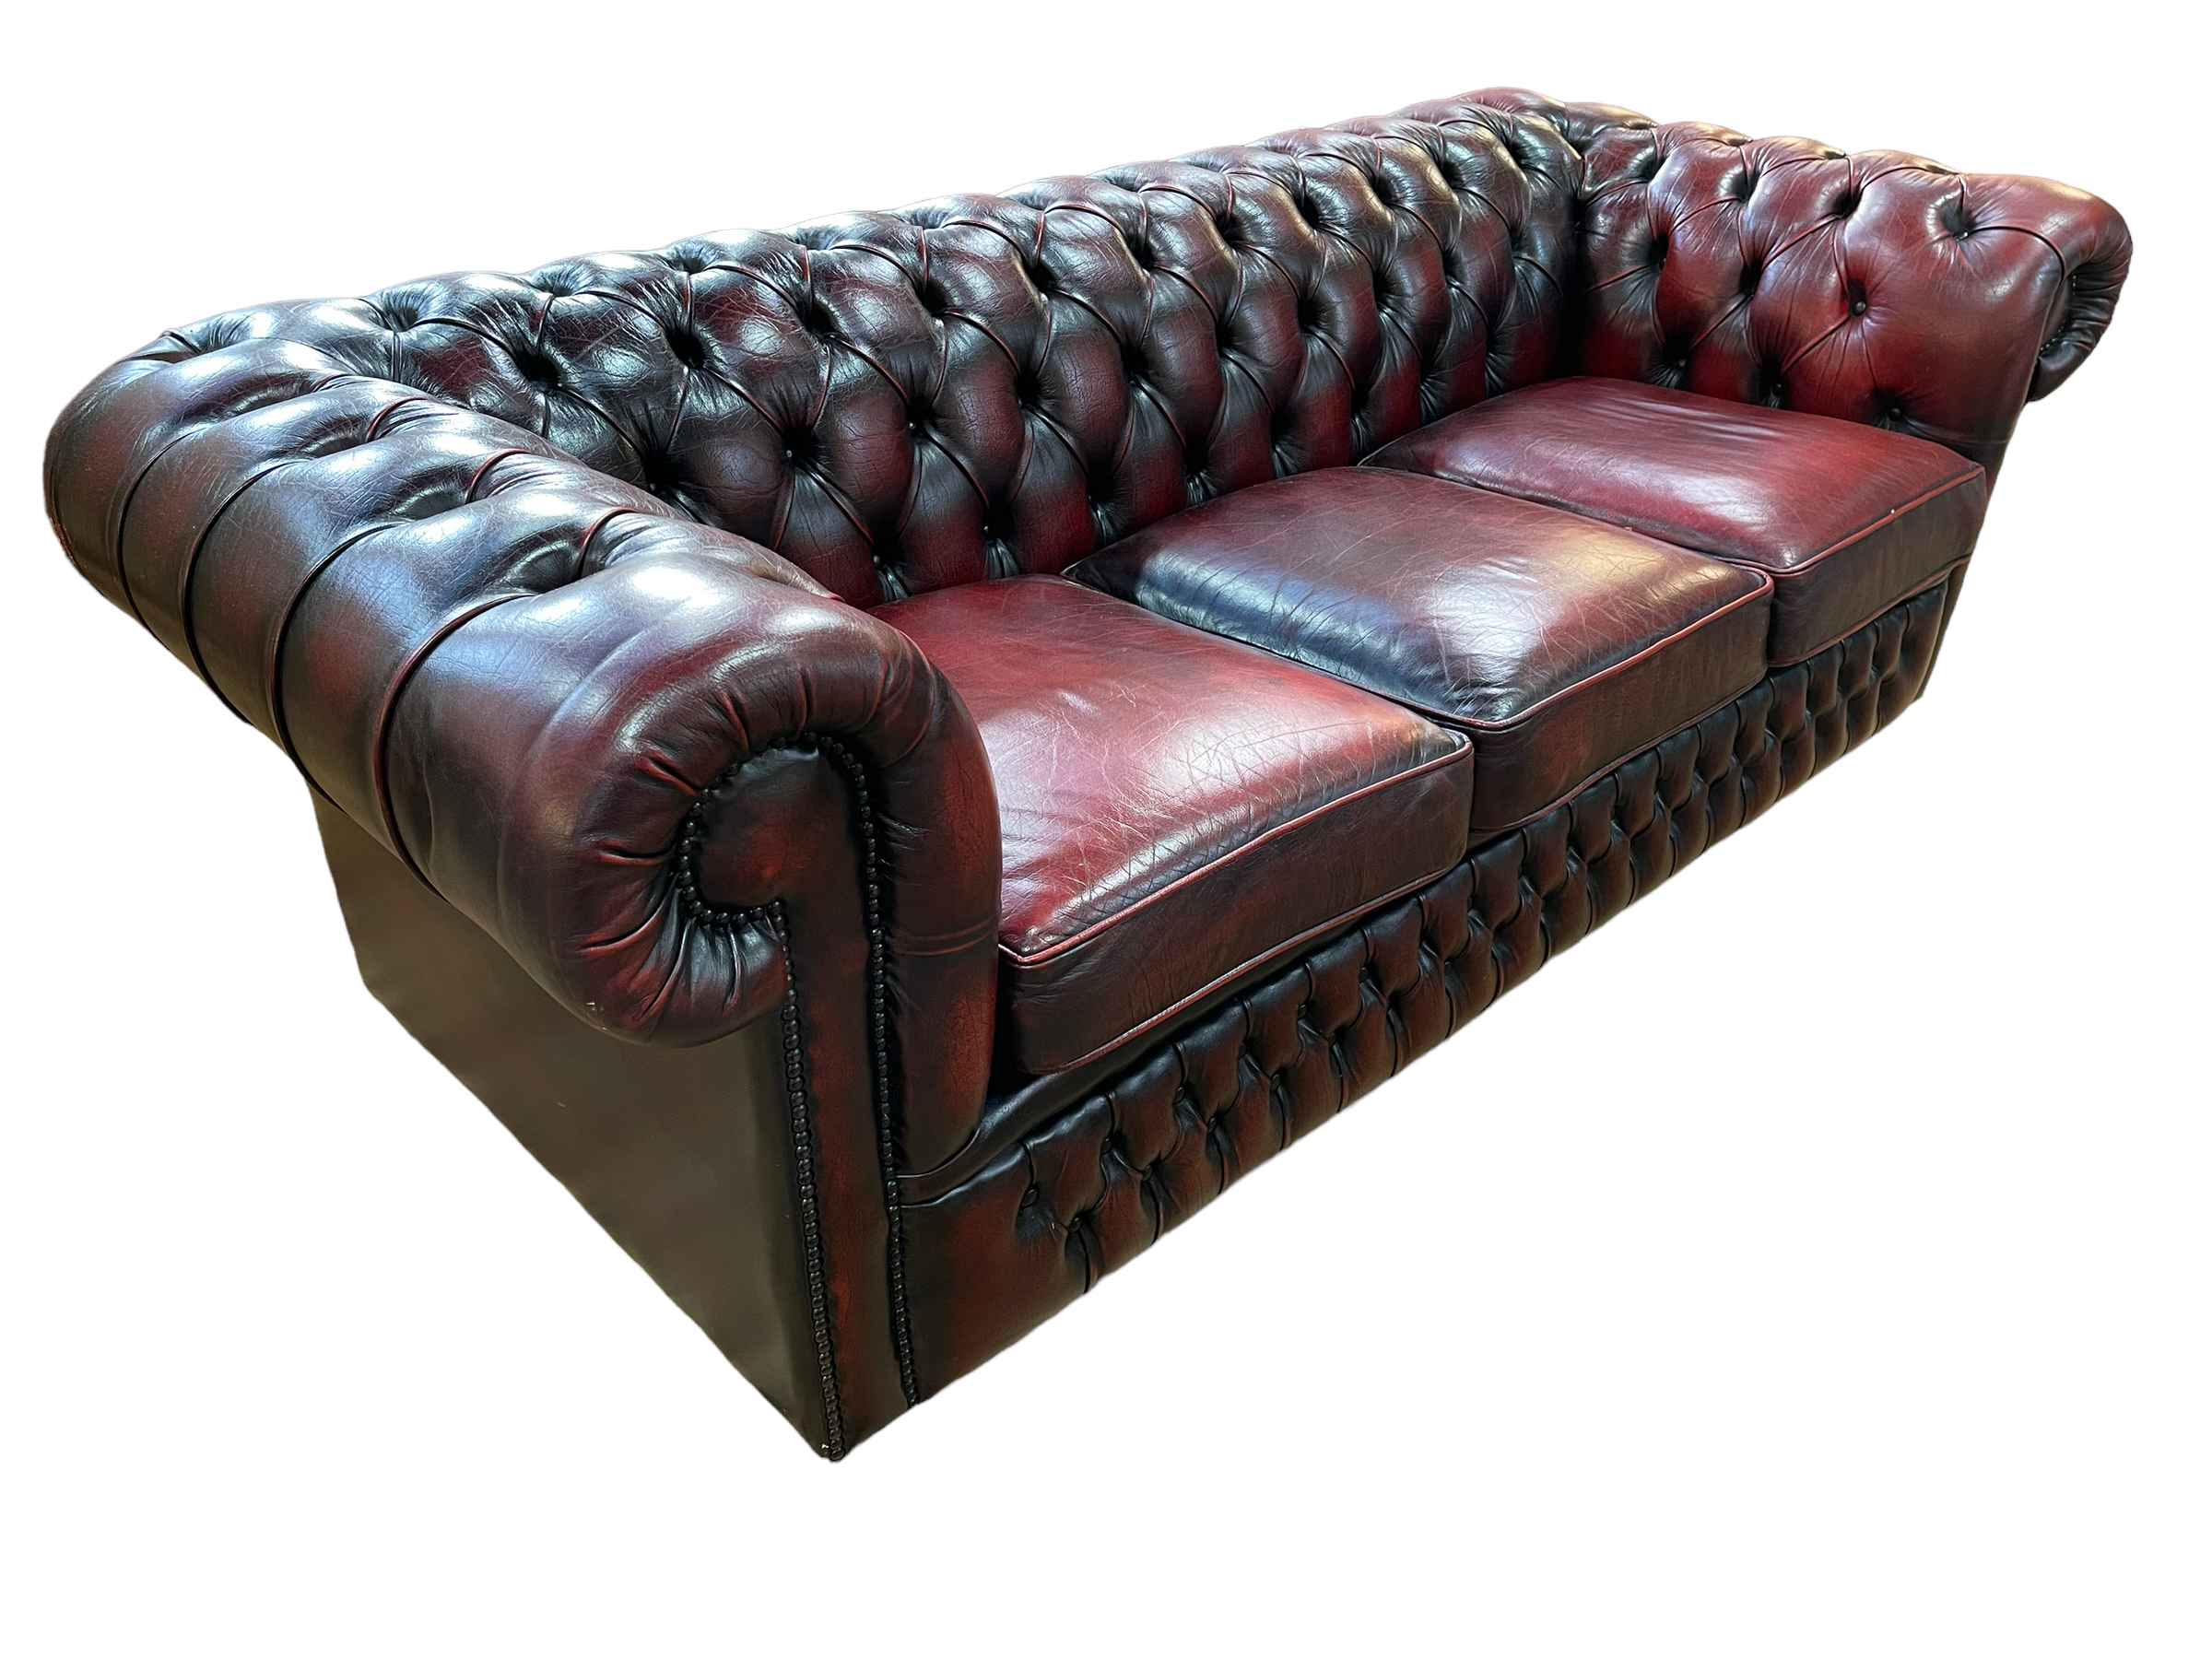 Ox blood buttoned leather three seater Chesterfield settee, 200cm by 66cm by 88cm.